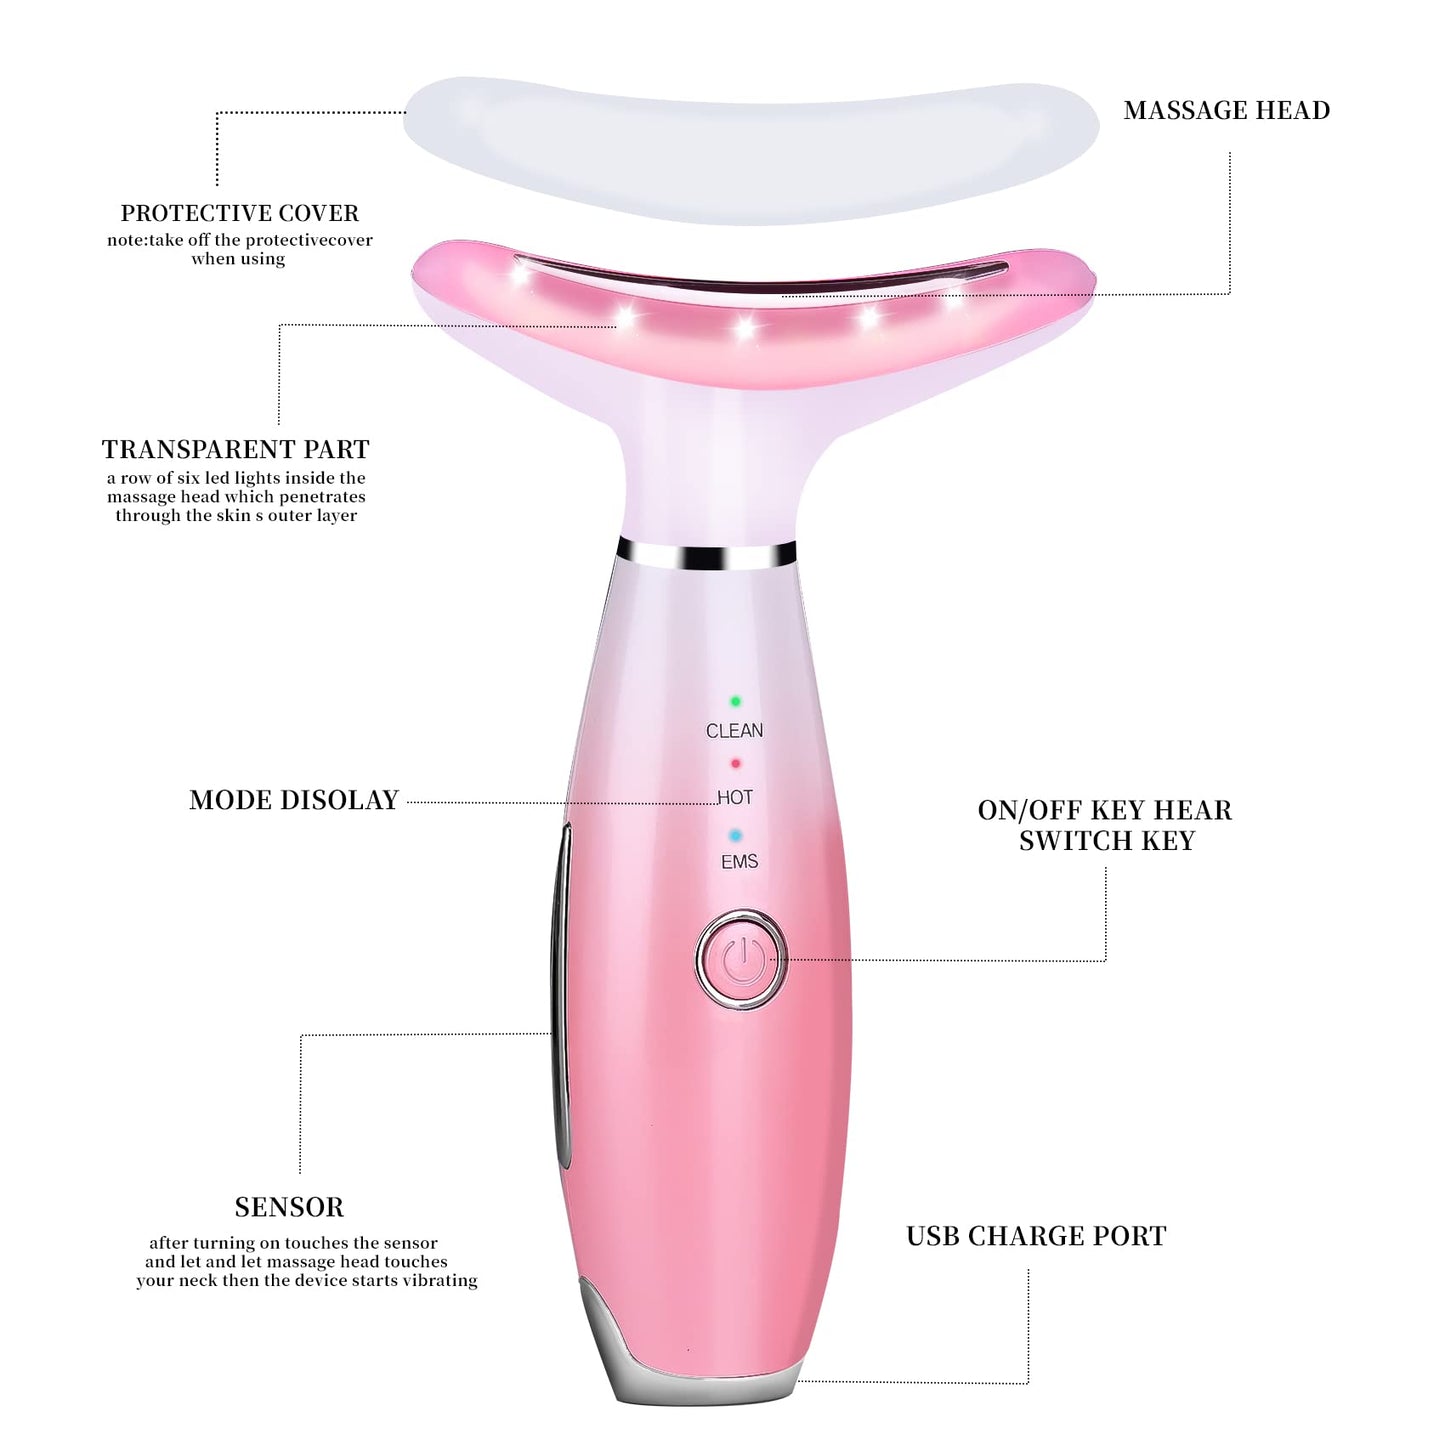 3-in-1 Facial Vibrating Massager for Face and Neck